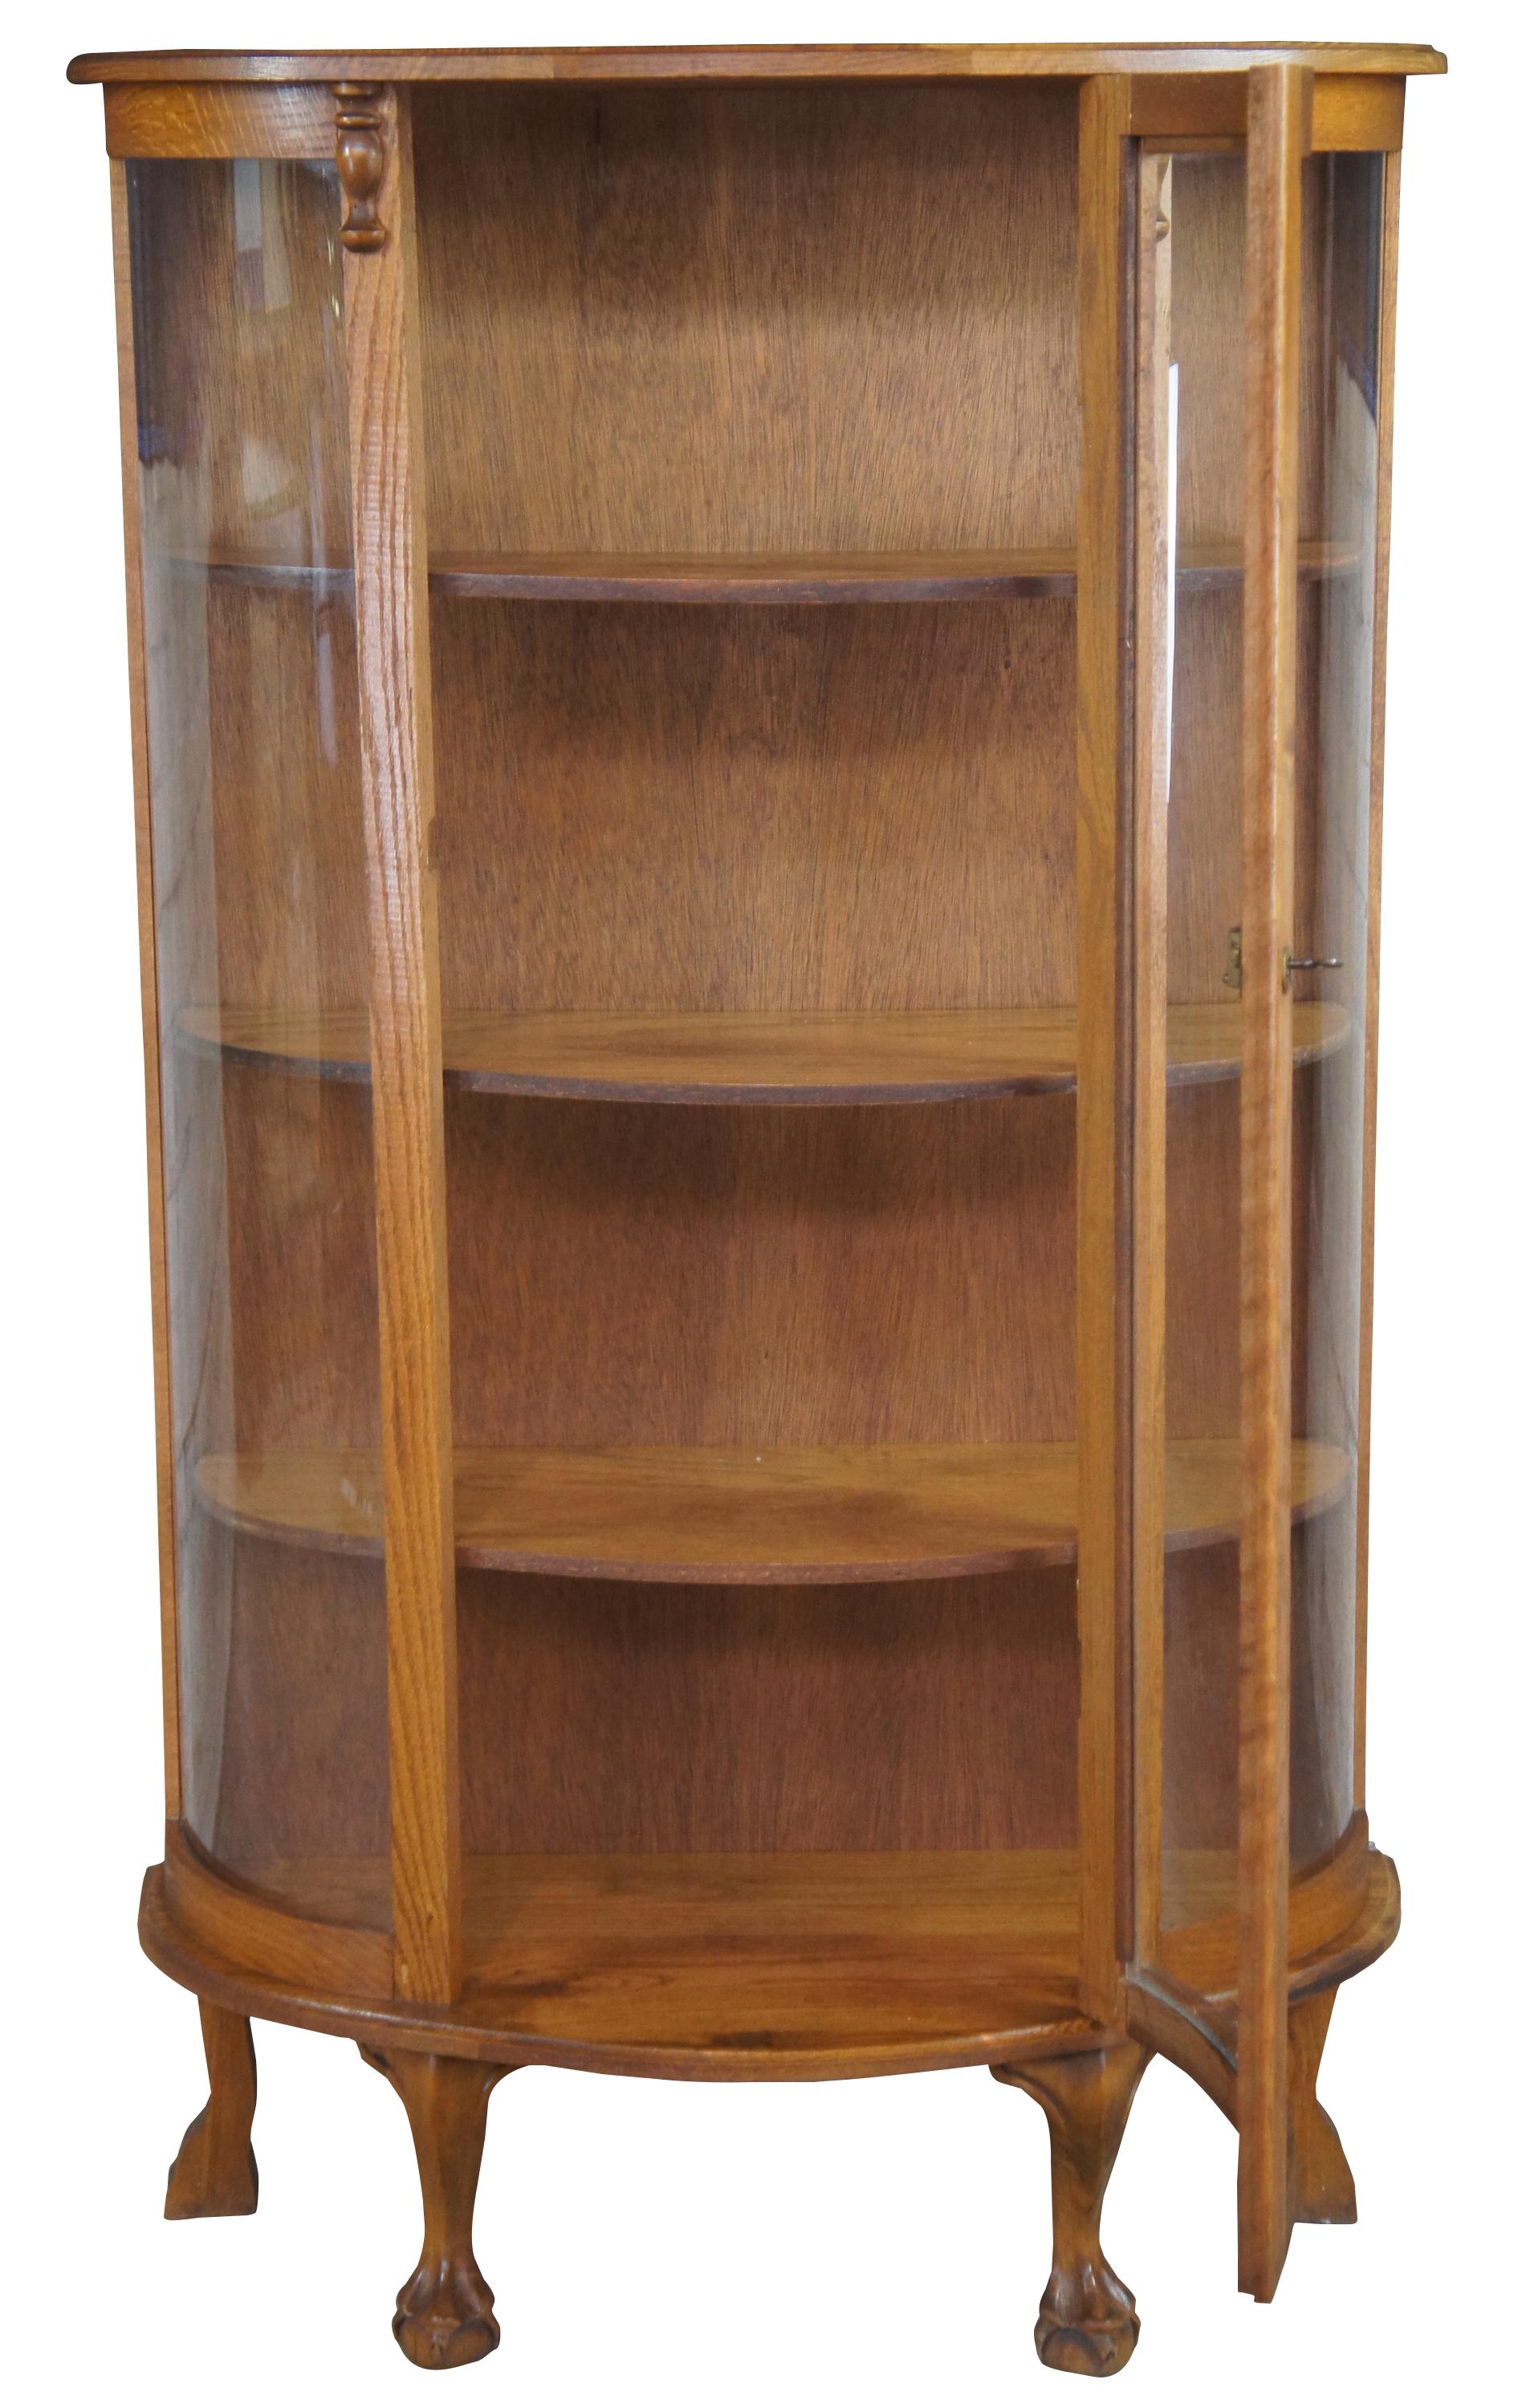 Early 20th century oak bowfront curio or display cabinet. Features a demiulune form with three shelves over ball and claw feet.
 